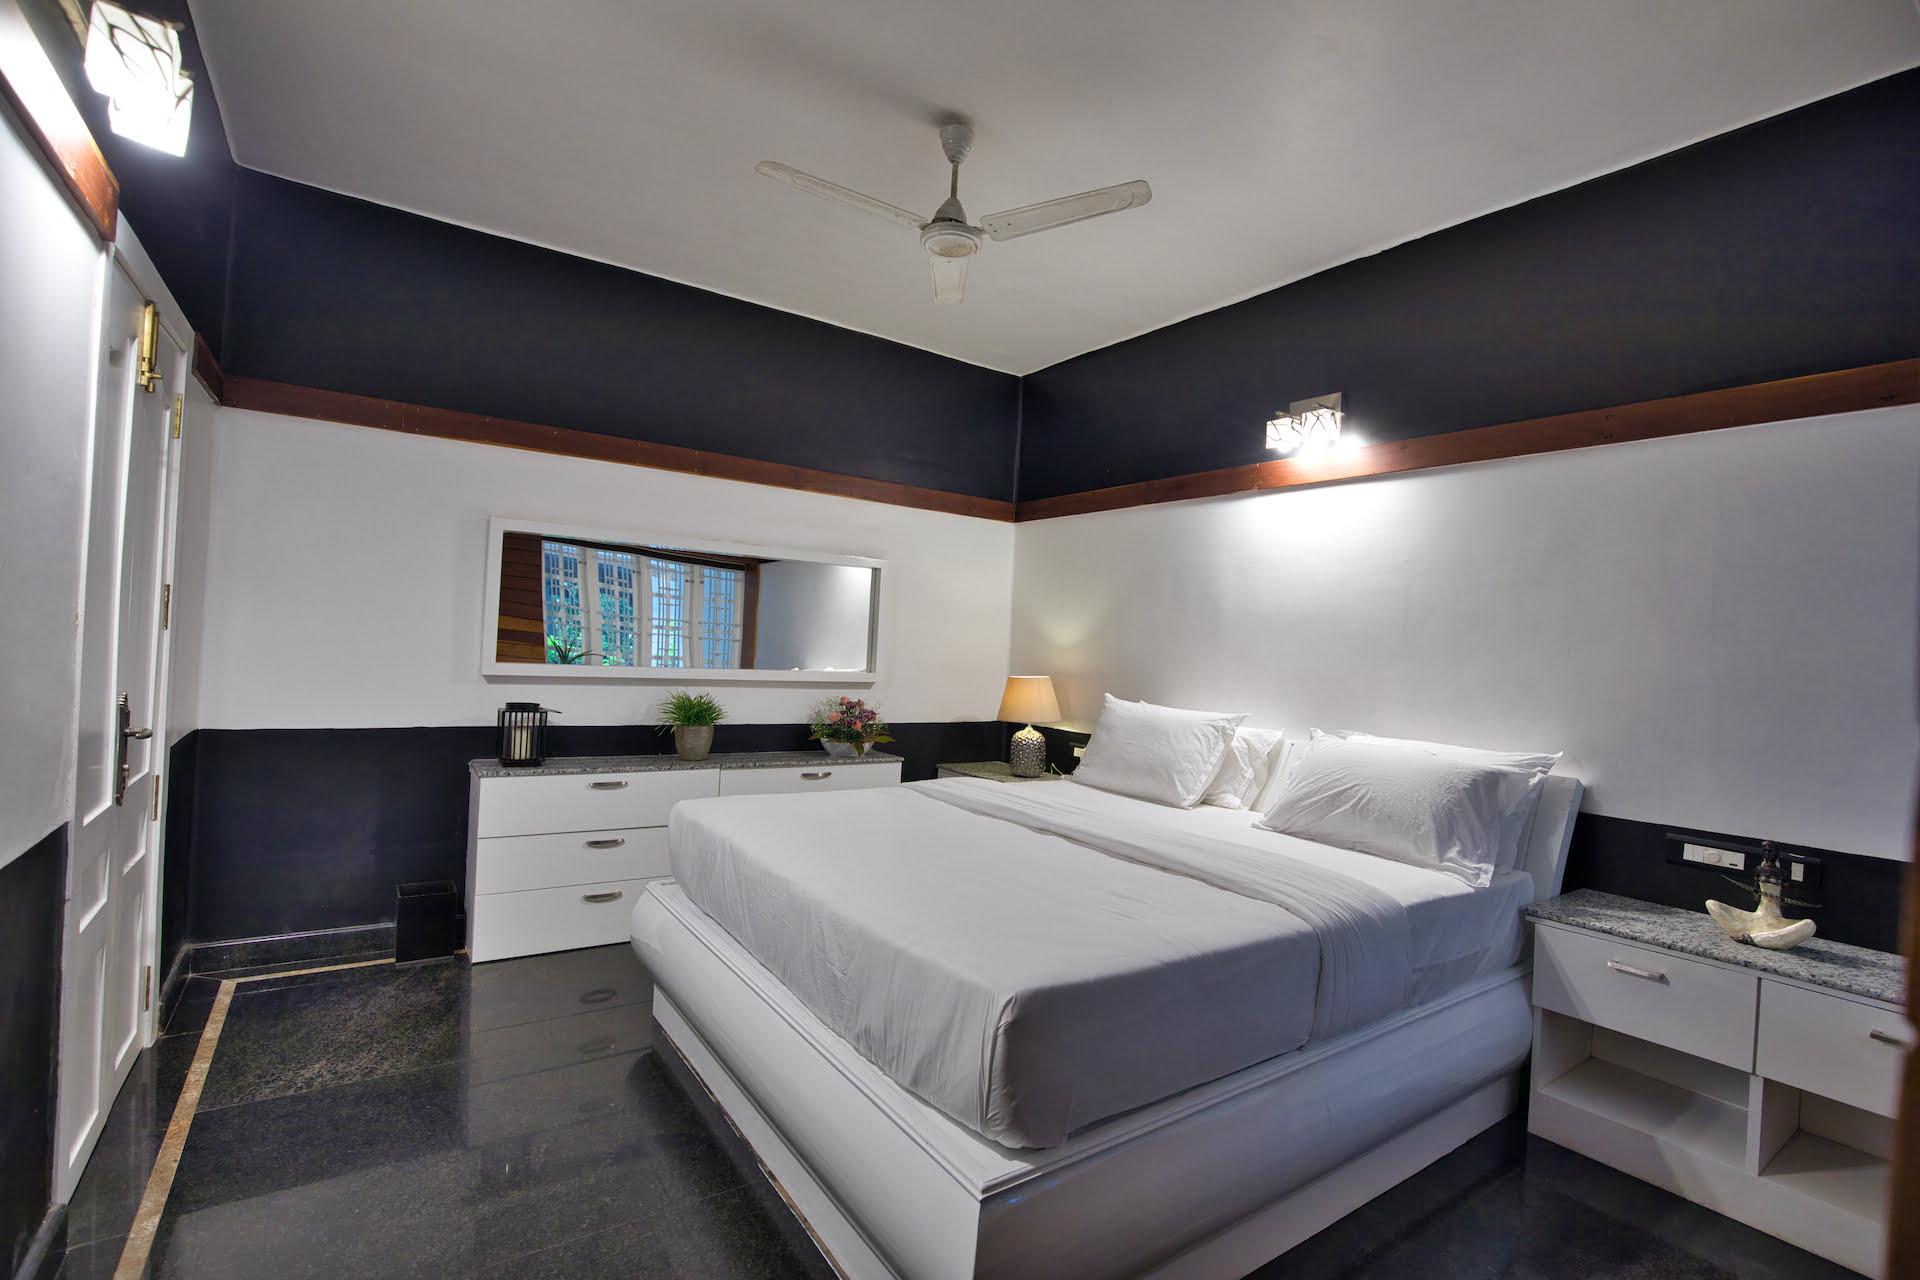 Bedroom in the Executive Suite at Softouch Ayurveda Village, Kerala, featuring a black and white themed decor, providing a modern and stylish ambiance